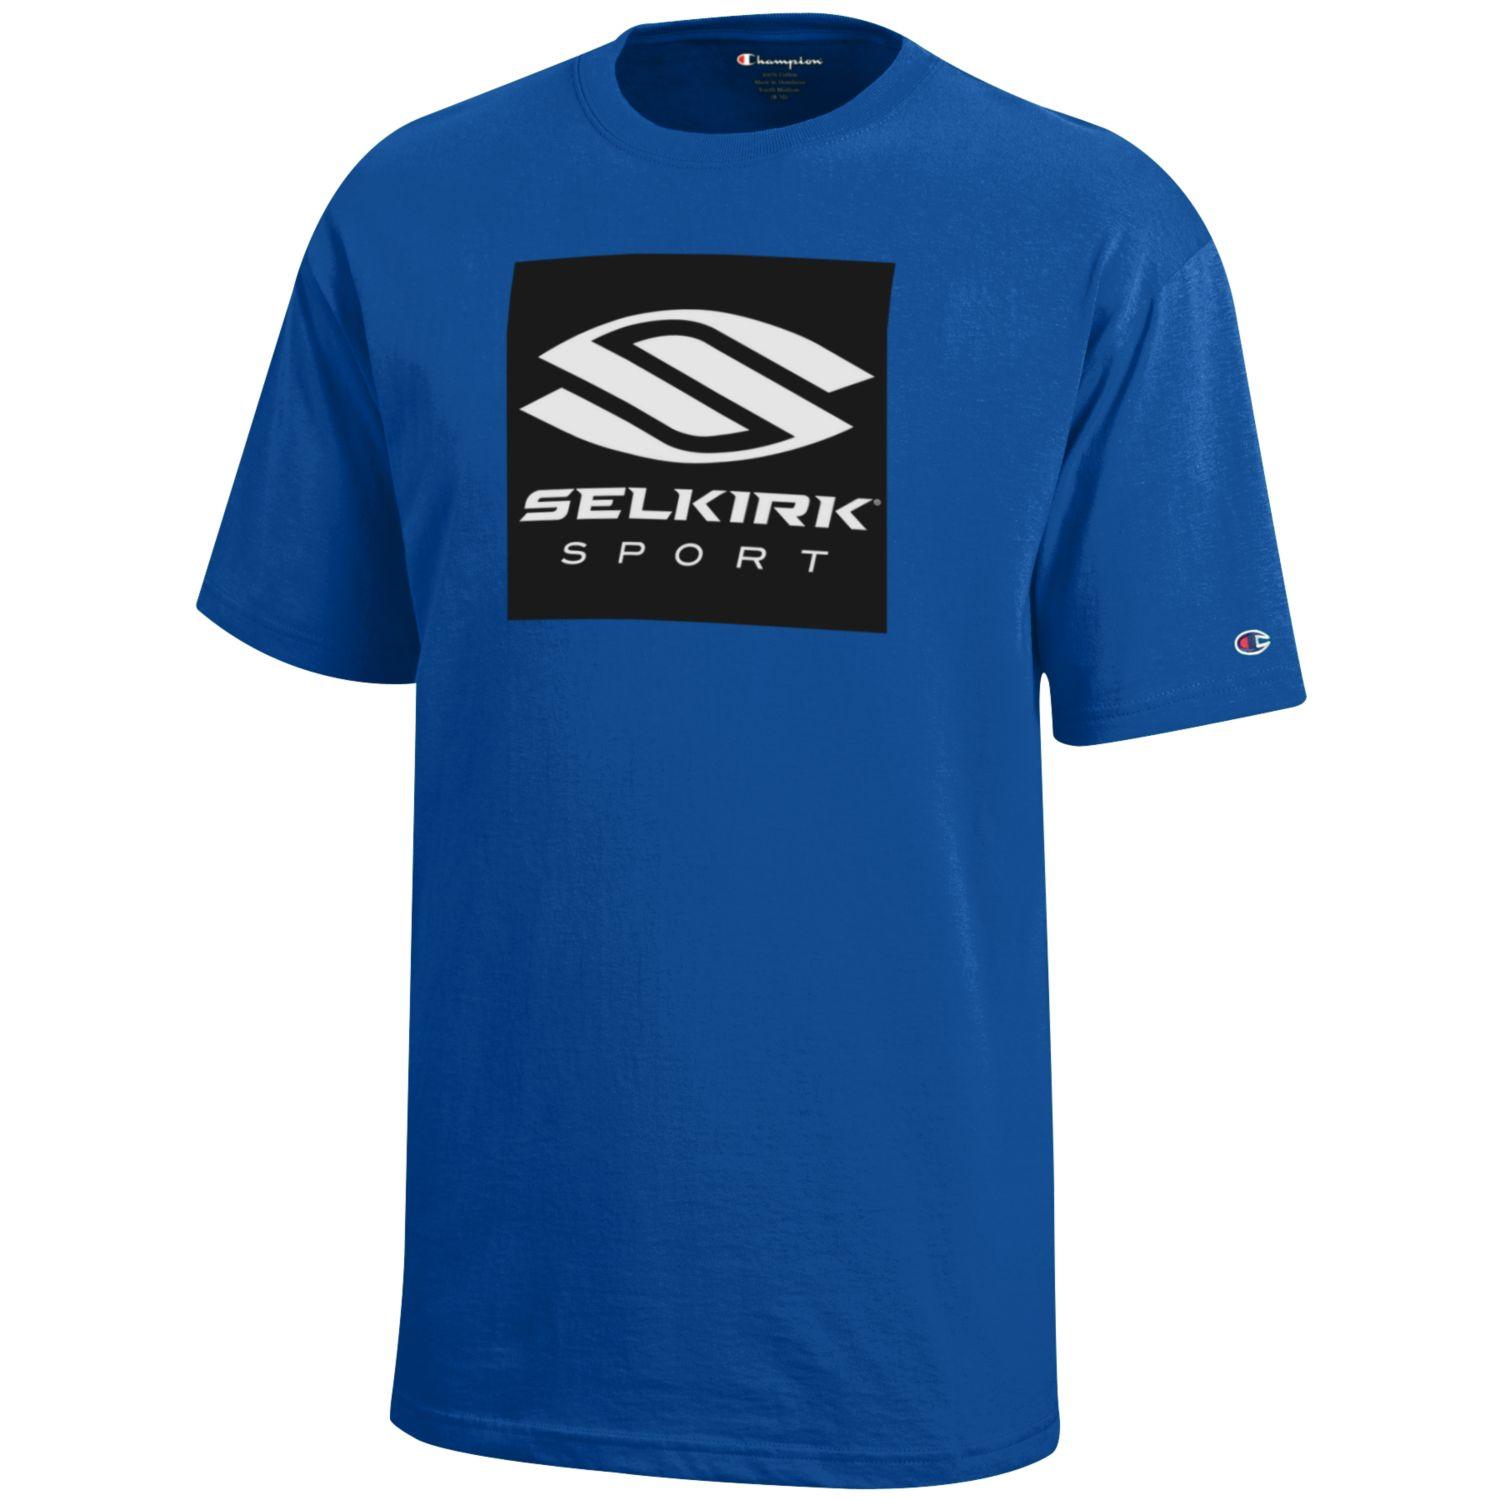 Royal Selkirk Youth Short Sleeve Jersey - Champion